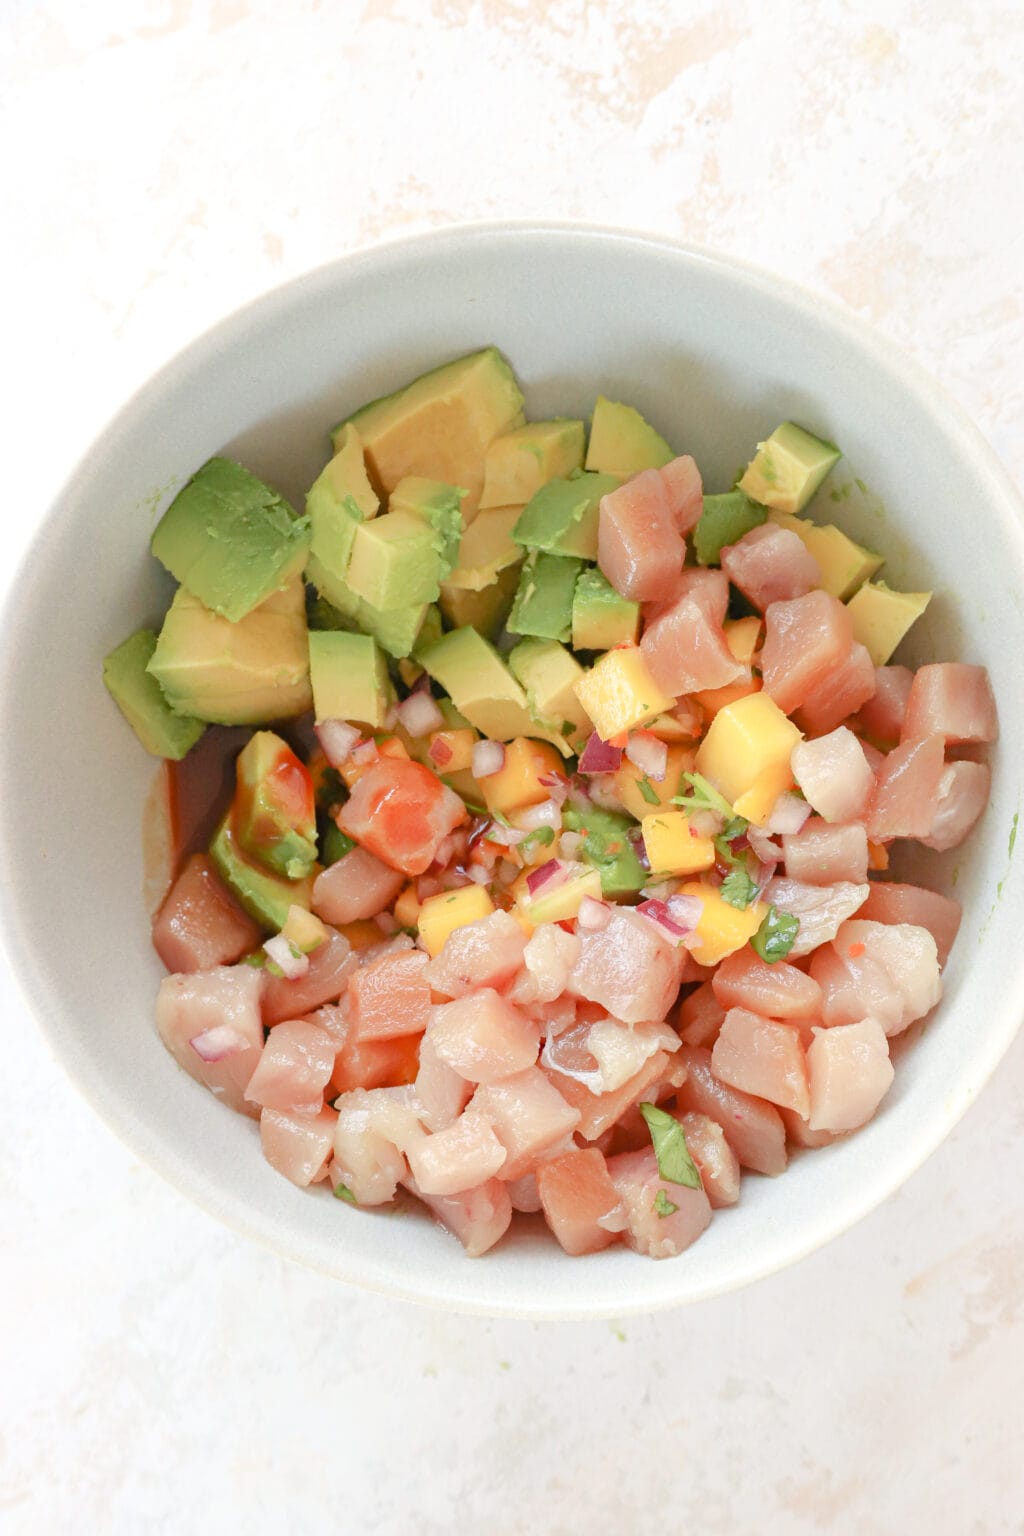 A white bowl has the ingredients for tuna avocado boats in it. At the top is cubed avocado, then mango habanero salsa, then cubed sushi-grade tuna (which is pink), and then soy sauce.